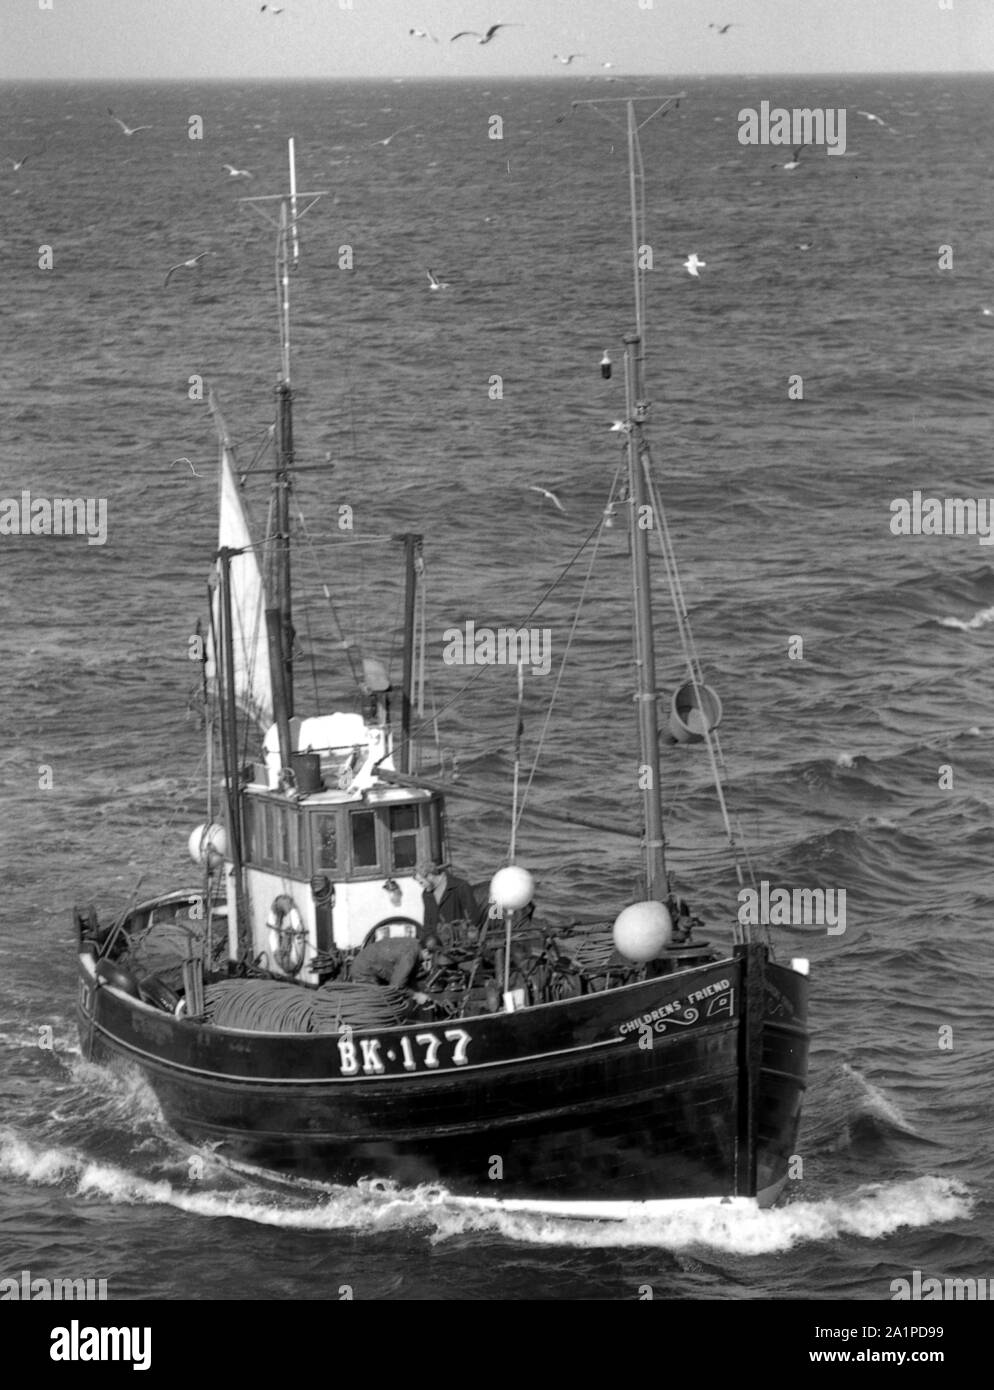 Childrens Friend, BK177, entering Seahouses harbour, Northumberland, 1972 Stock Photo